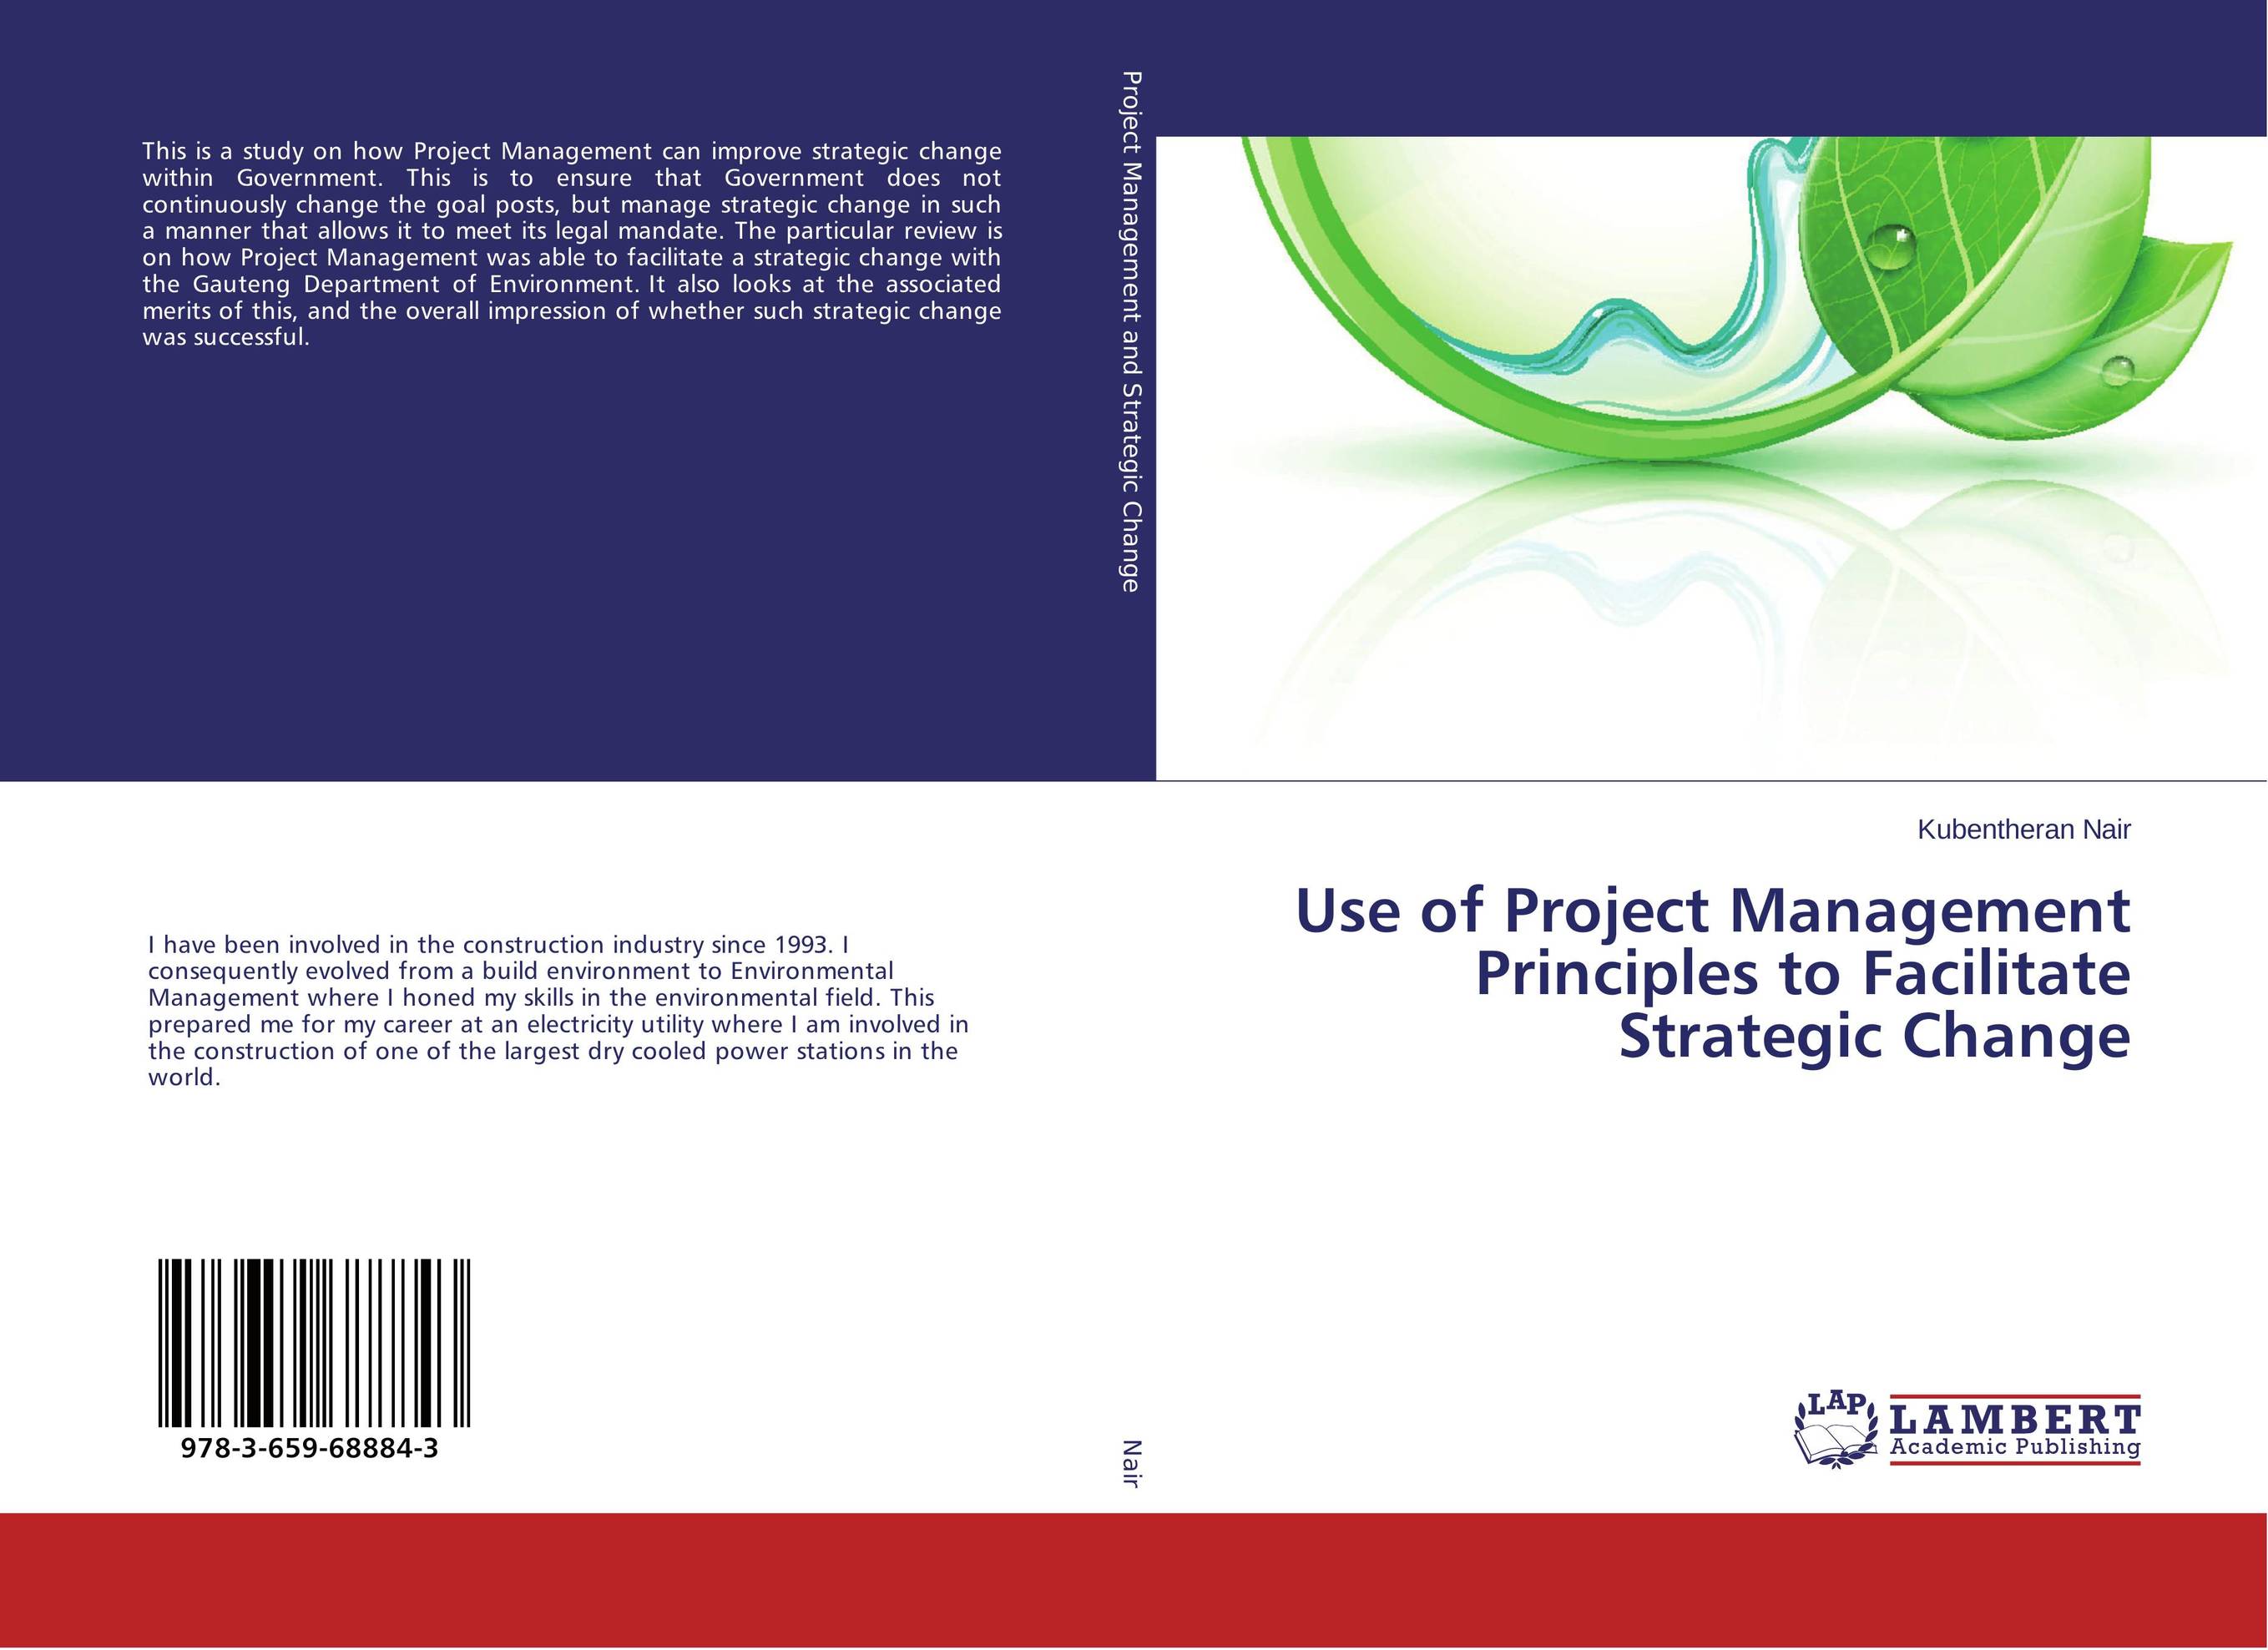 Use of Project Management Principles to Facilitate Strategic Change